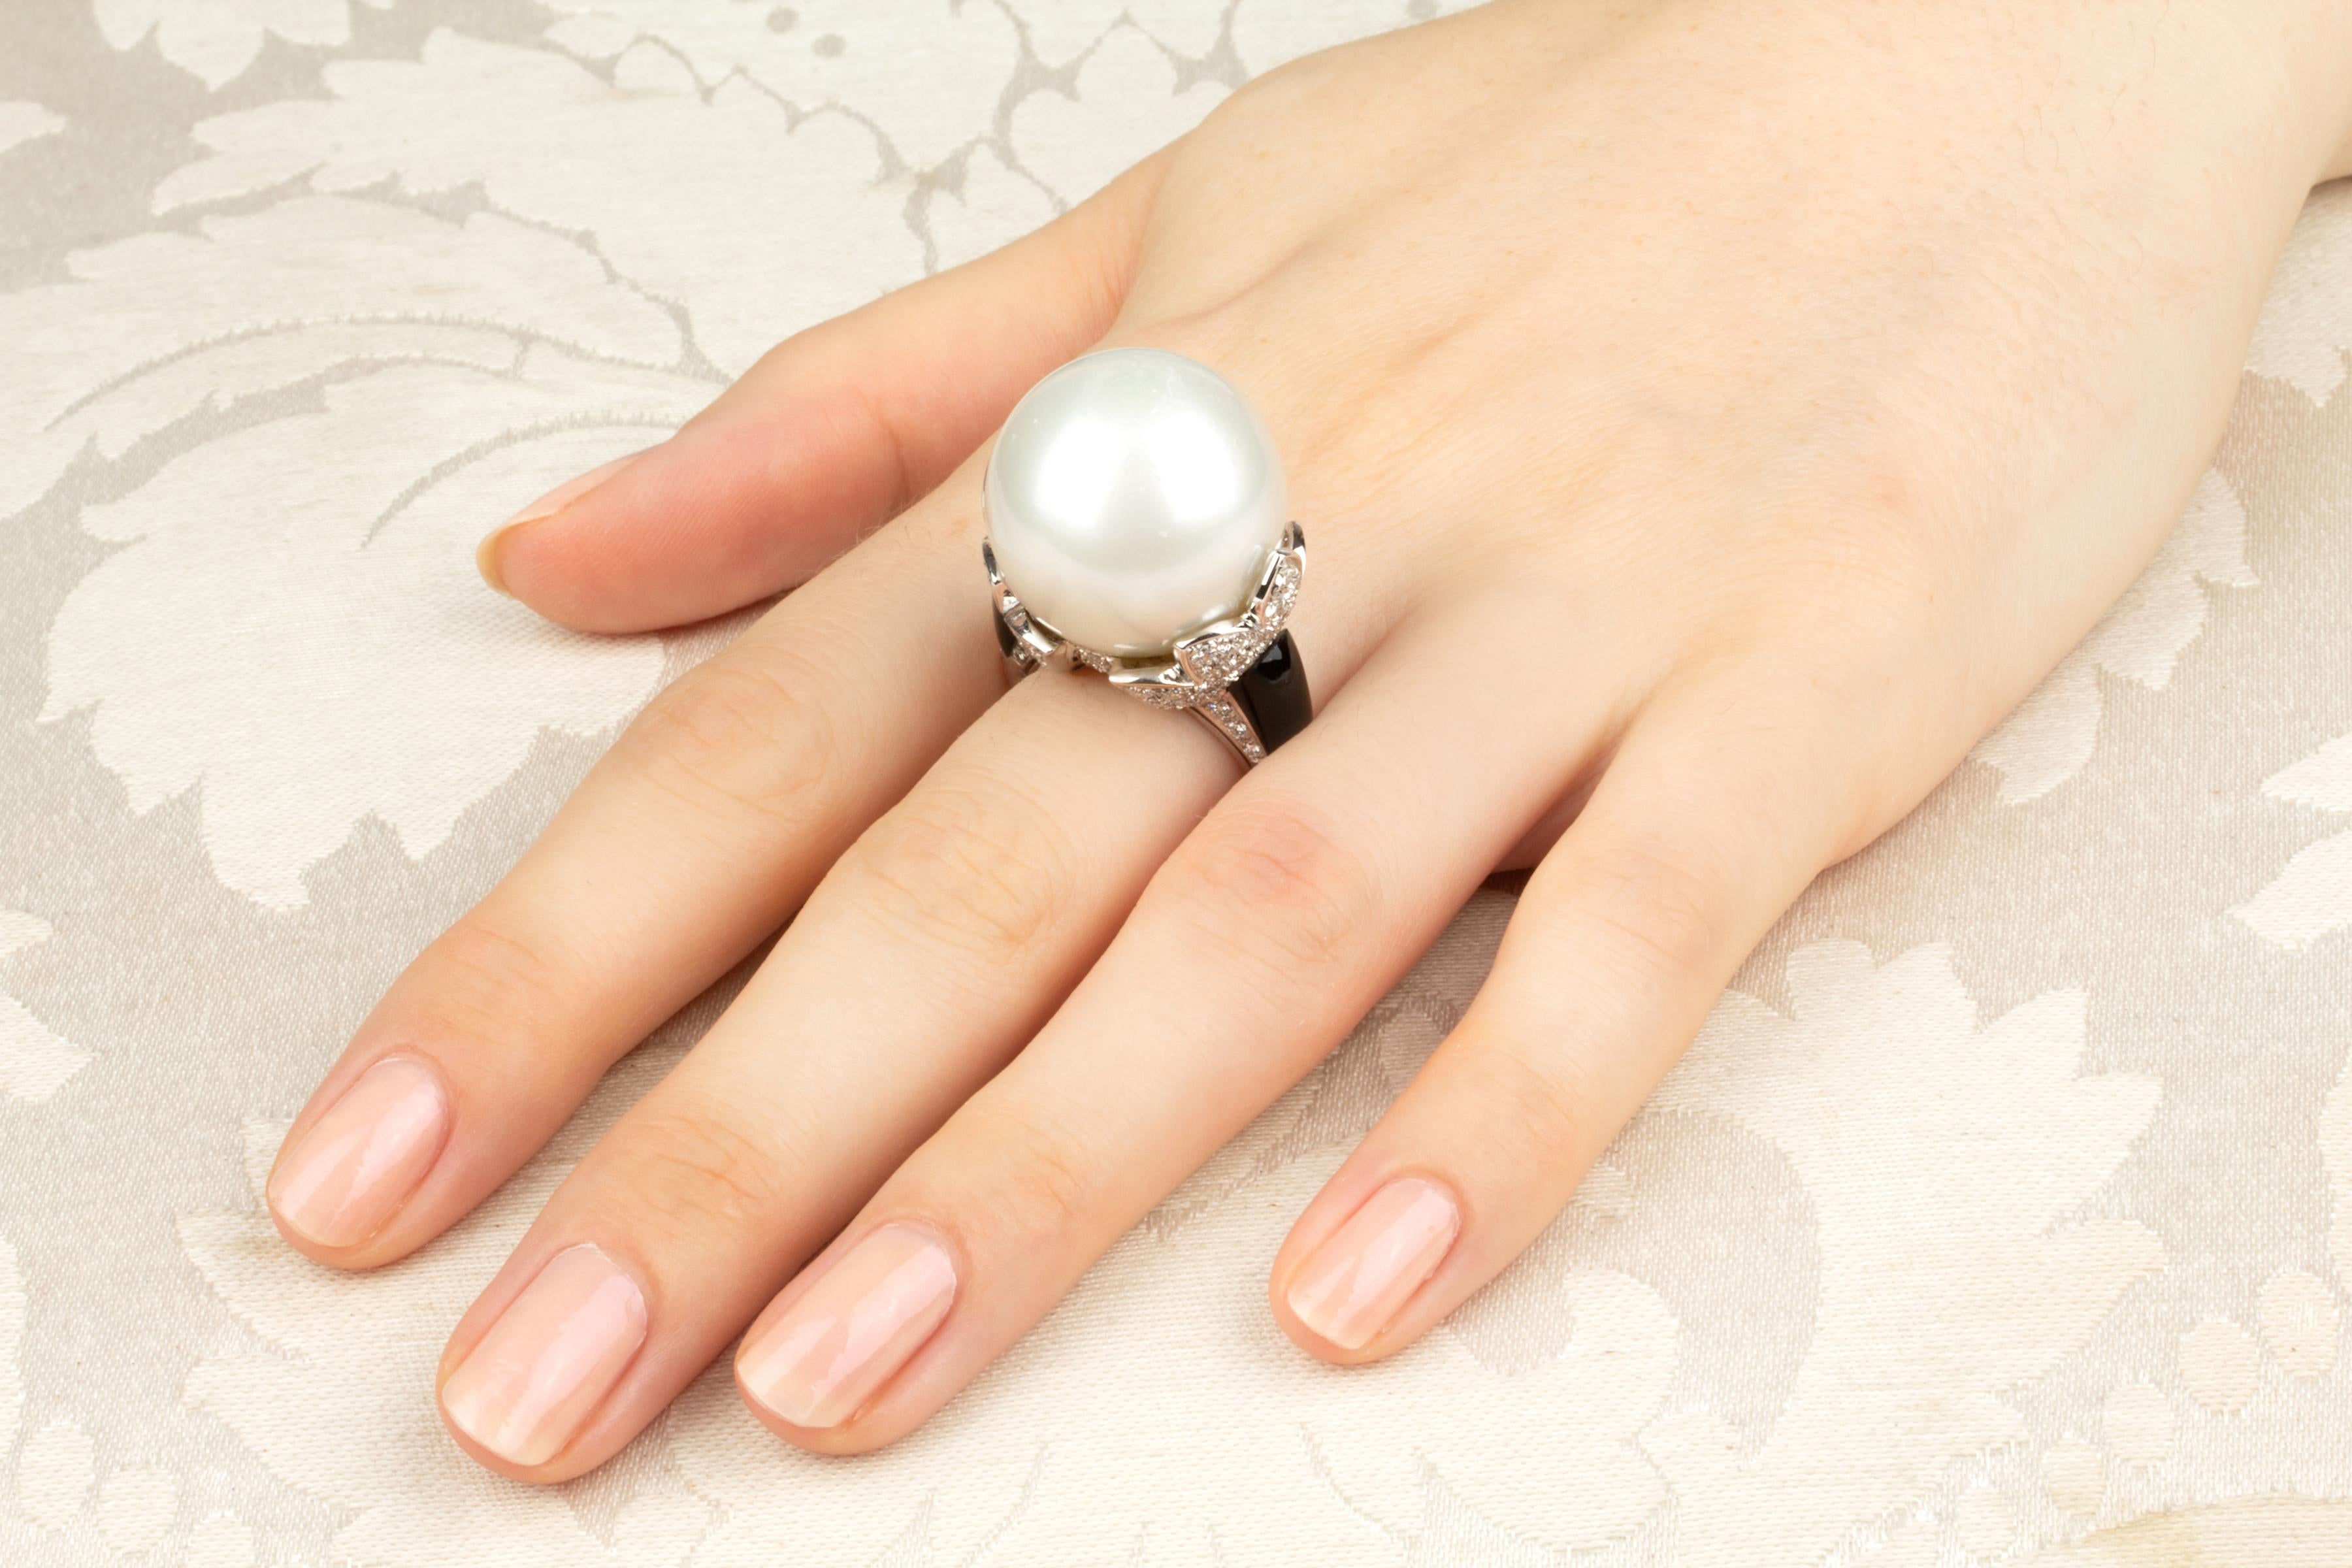 This South Sea pearl and diamond ring features an exceptionally large and beautiful South Sea pearl of 20mm size. The pearl is untreated. It displays a fine nacre and its natural color and luster have not been enhanced in any way. The pearl is